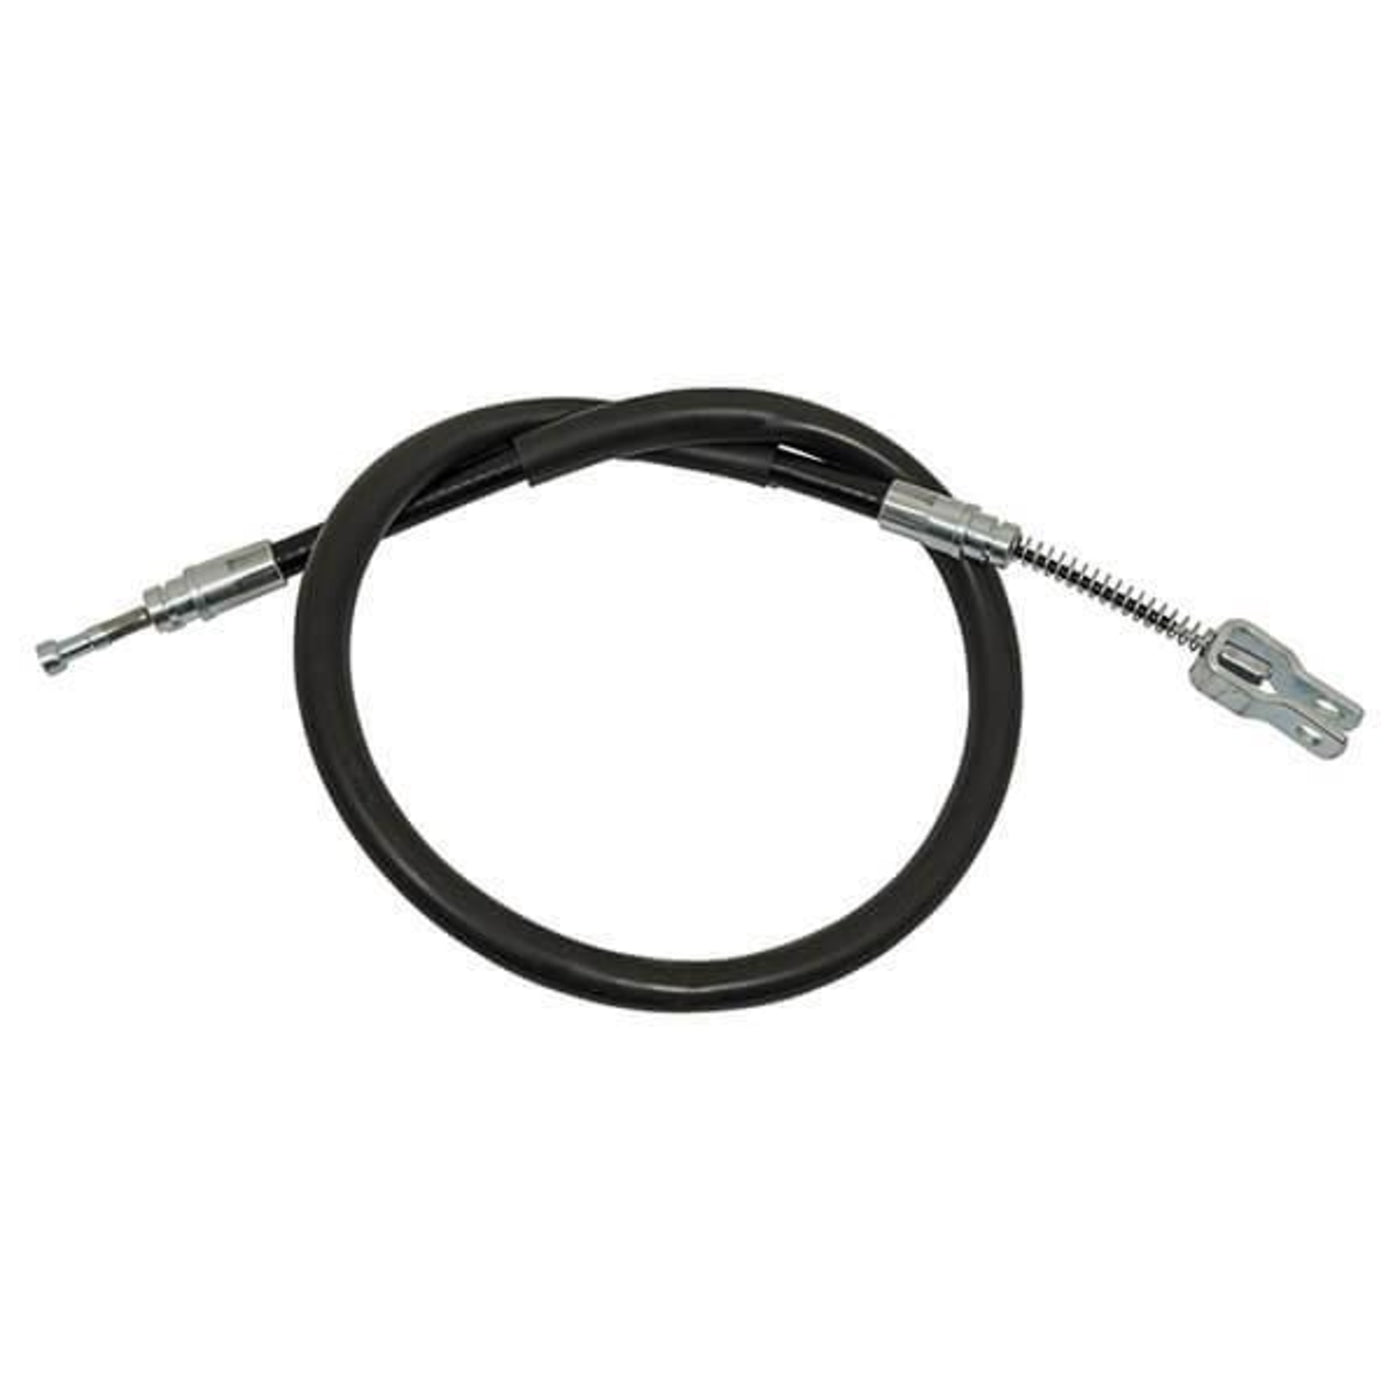 Driver - E-Z-GO Medalist / TXT Brake Cable (Years 1994-Up)